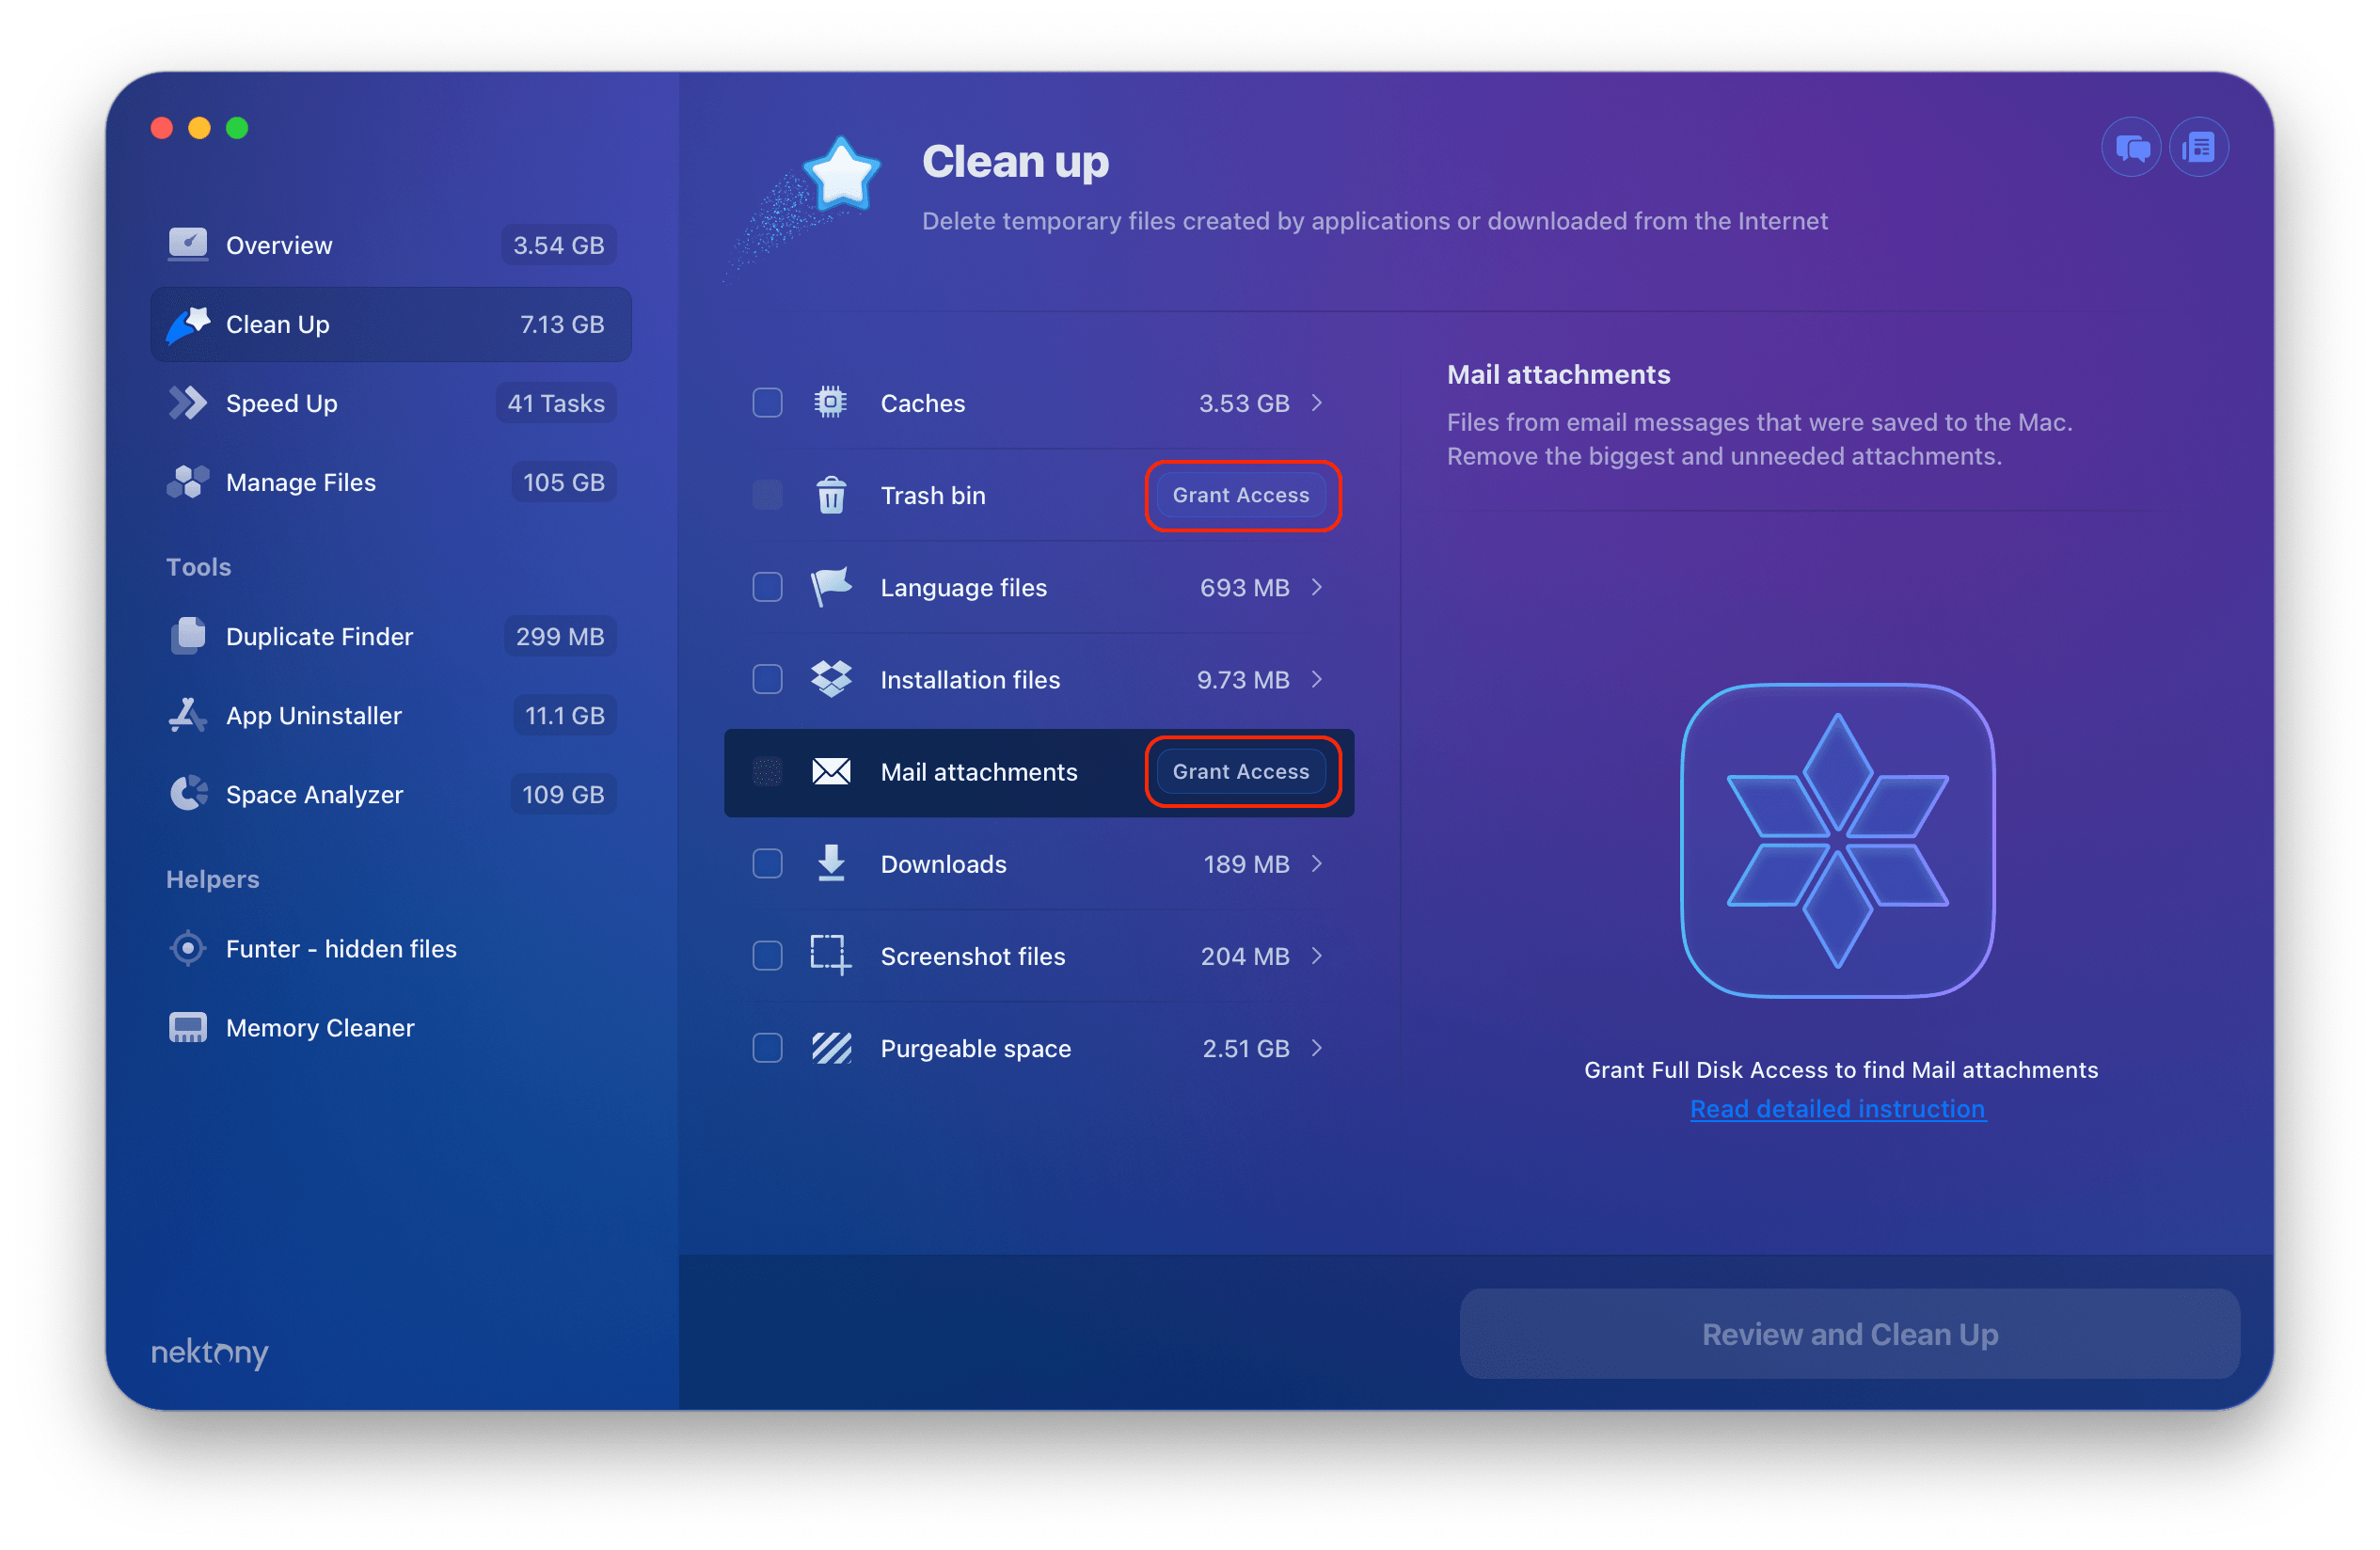 MacCleaner Pro showing the Grant Access buttons